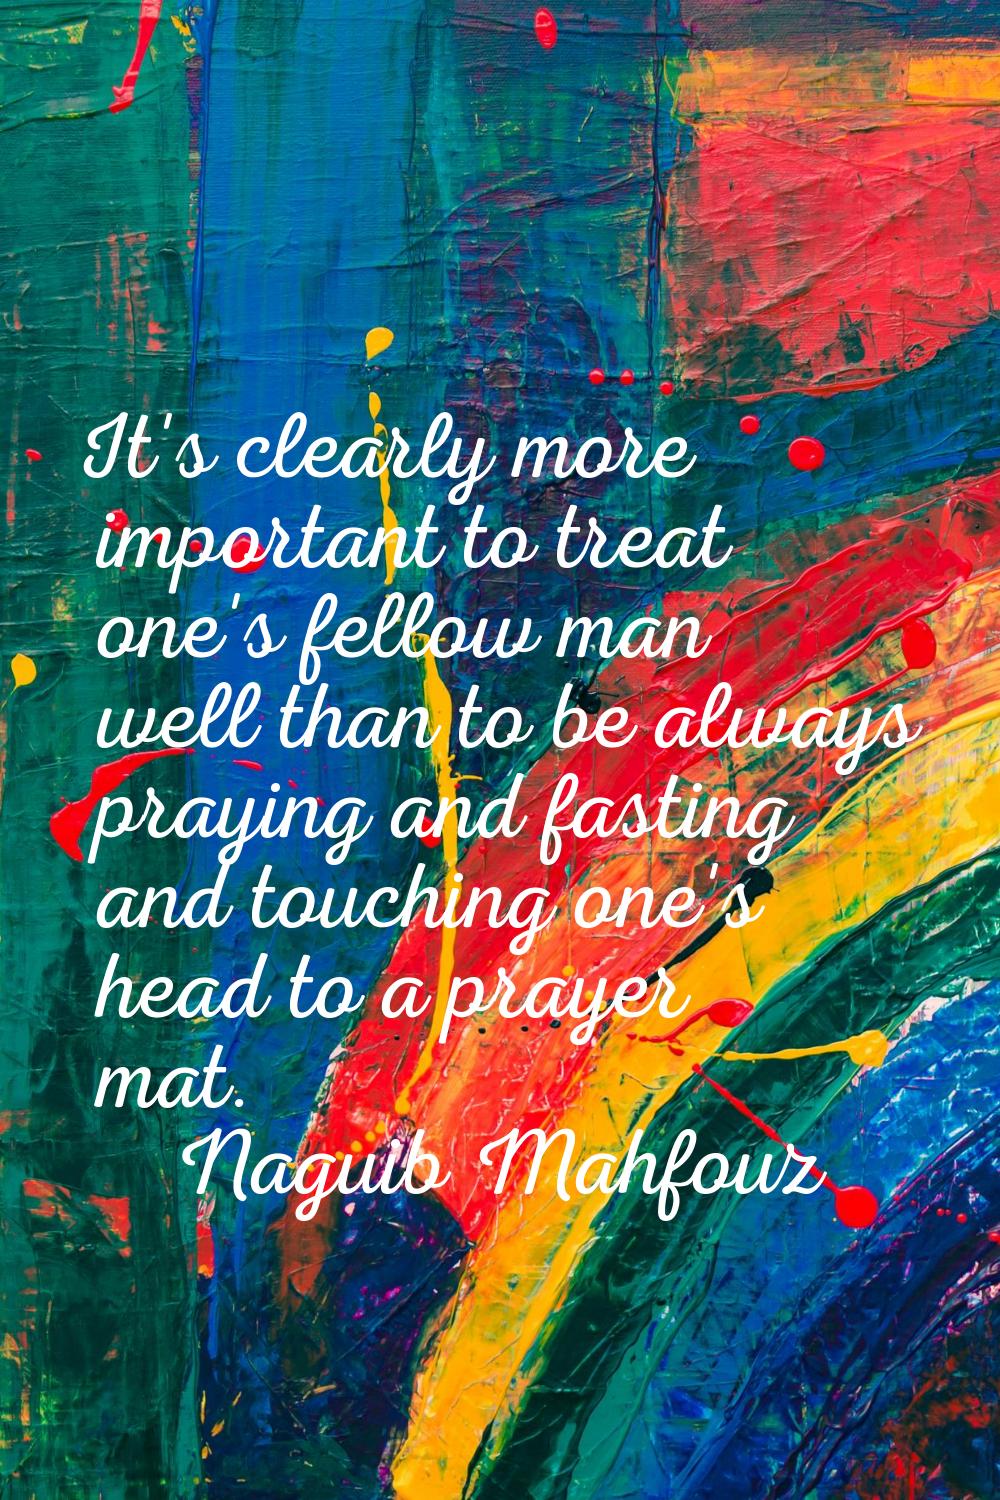 It's clearly more important to treat one's fellow man well than to be always praying and fasting an